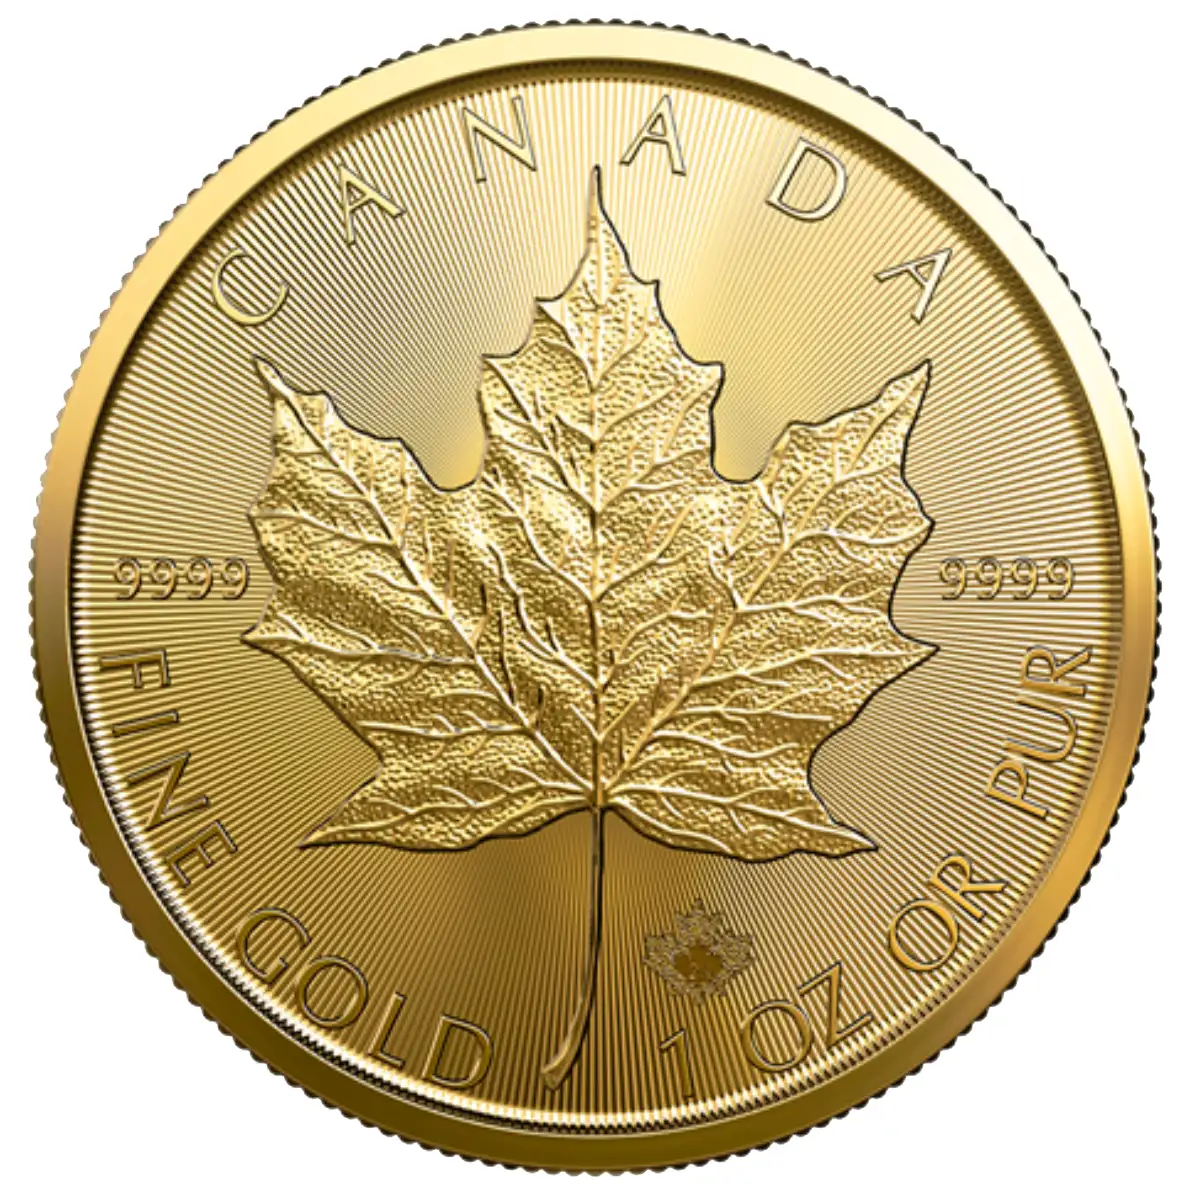 1oz Canadian Gold Maple Leaf Coin